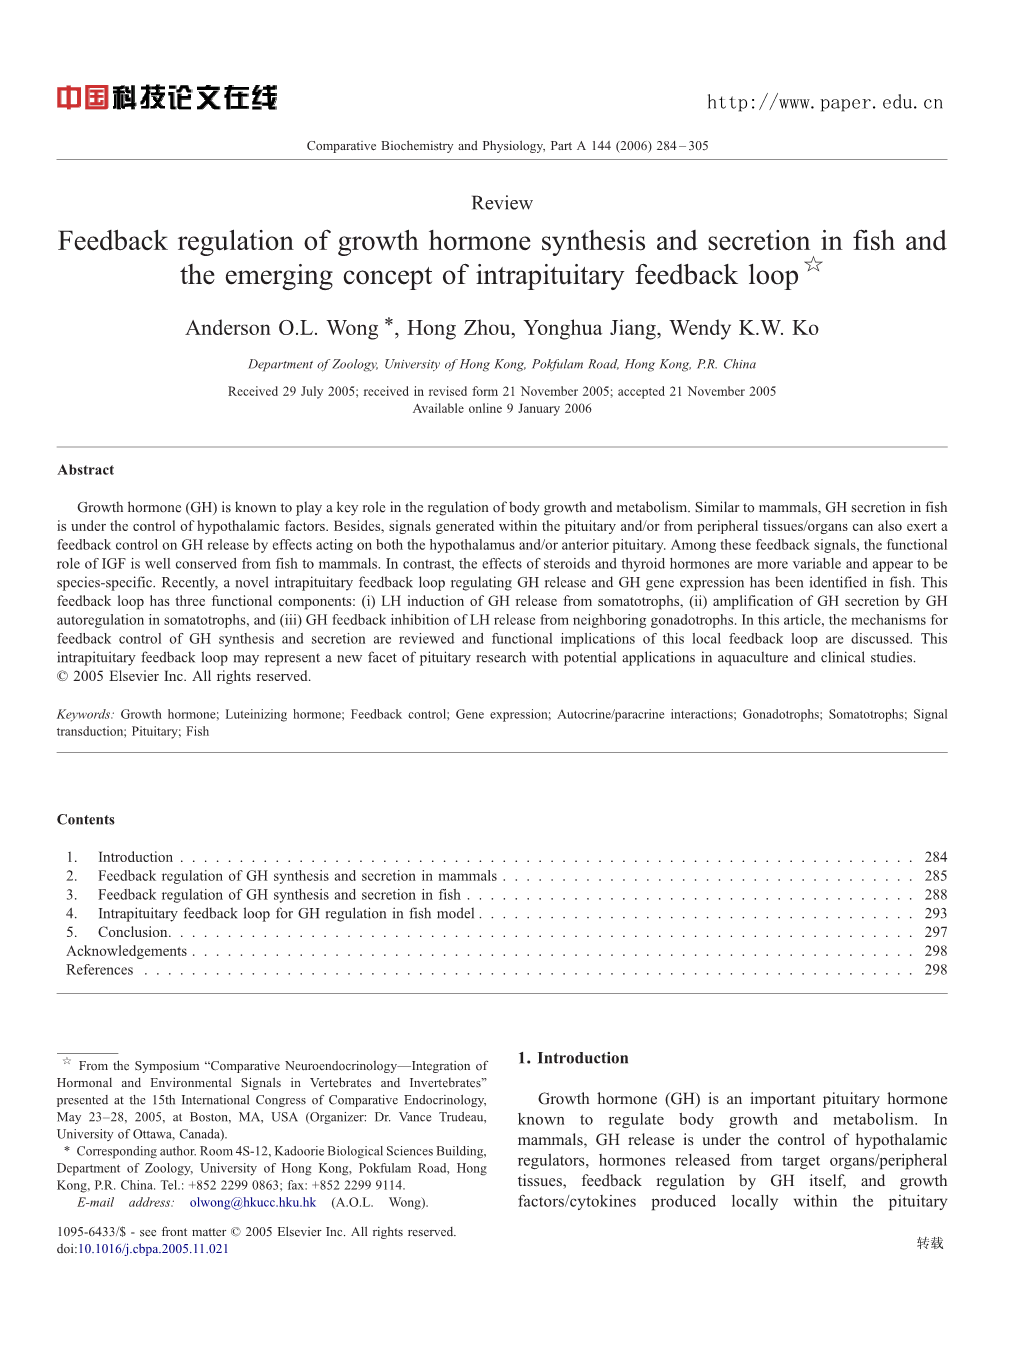 Feedback Regulation of Growth Hormone Synthesis and Secretion in Fish and the Emerging Concept of Intrapituitary Feedback Loop ☆ ⁎ Anderson O.L